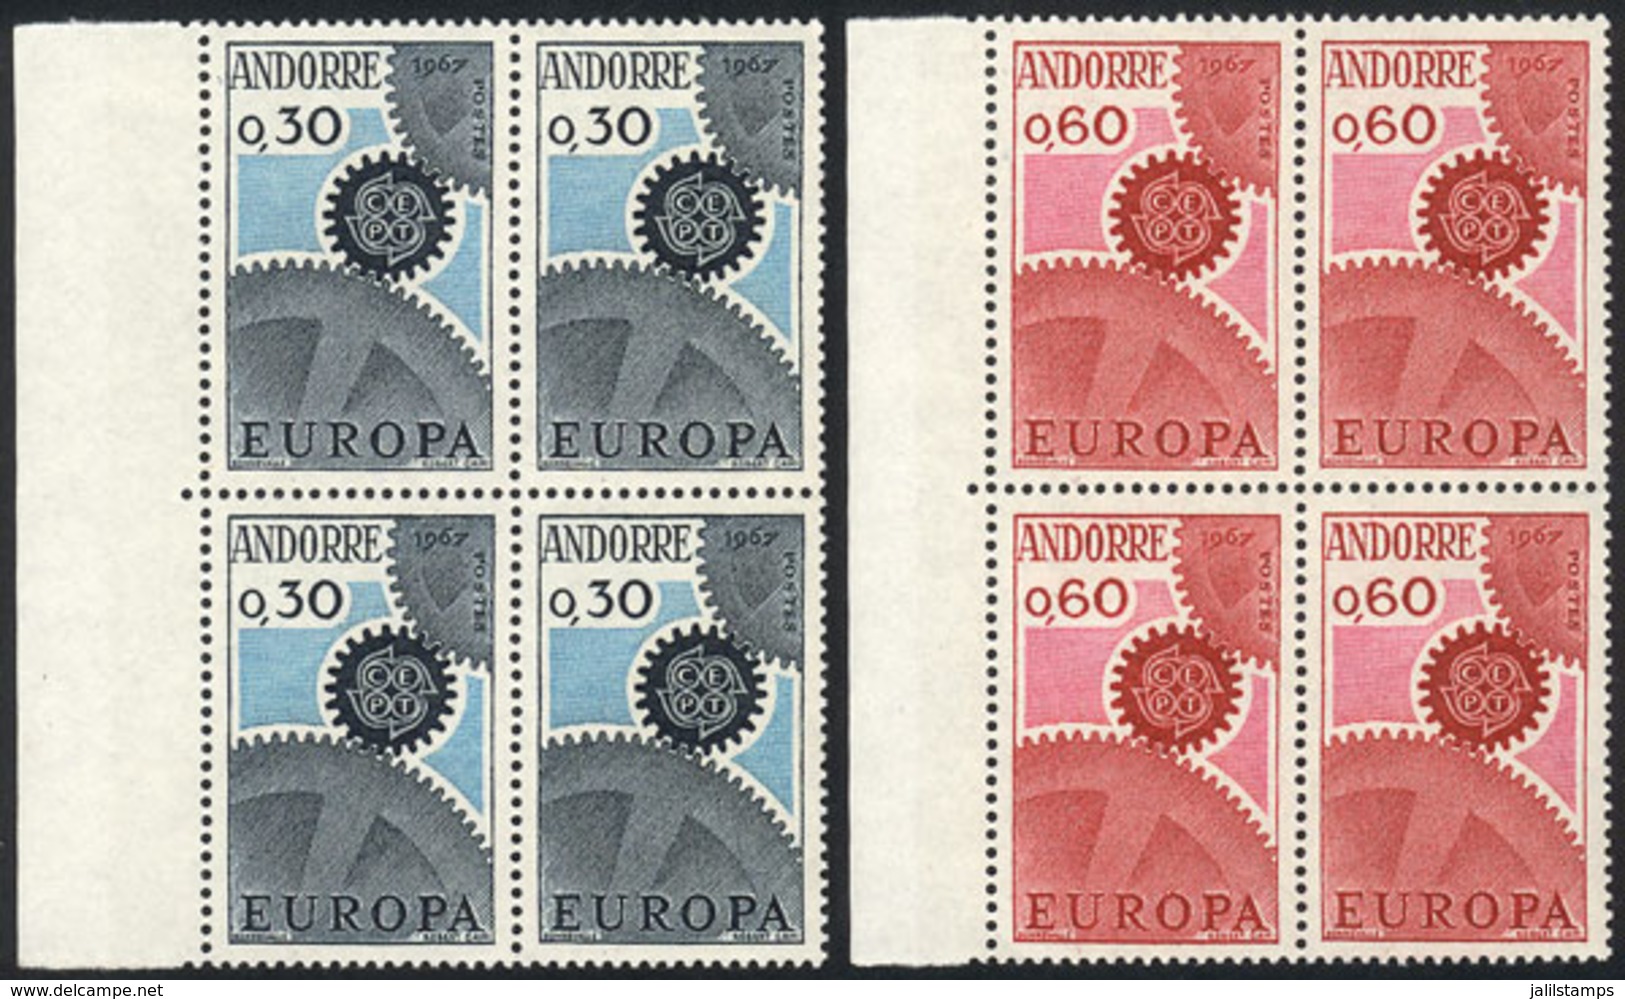 FRENCH ANDORRA: Yvert 179/180, 1967 Topic Europa, MNH Blocks Of 4, Excellent Quality, Catalog Value Euros 100. - Nuovi